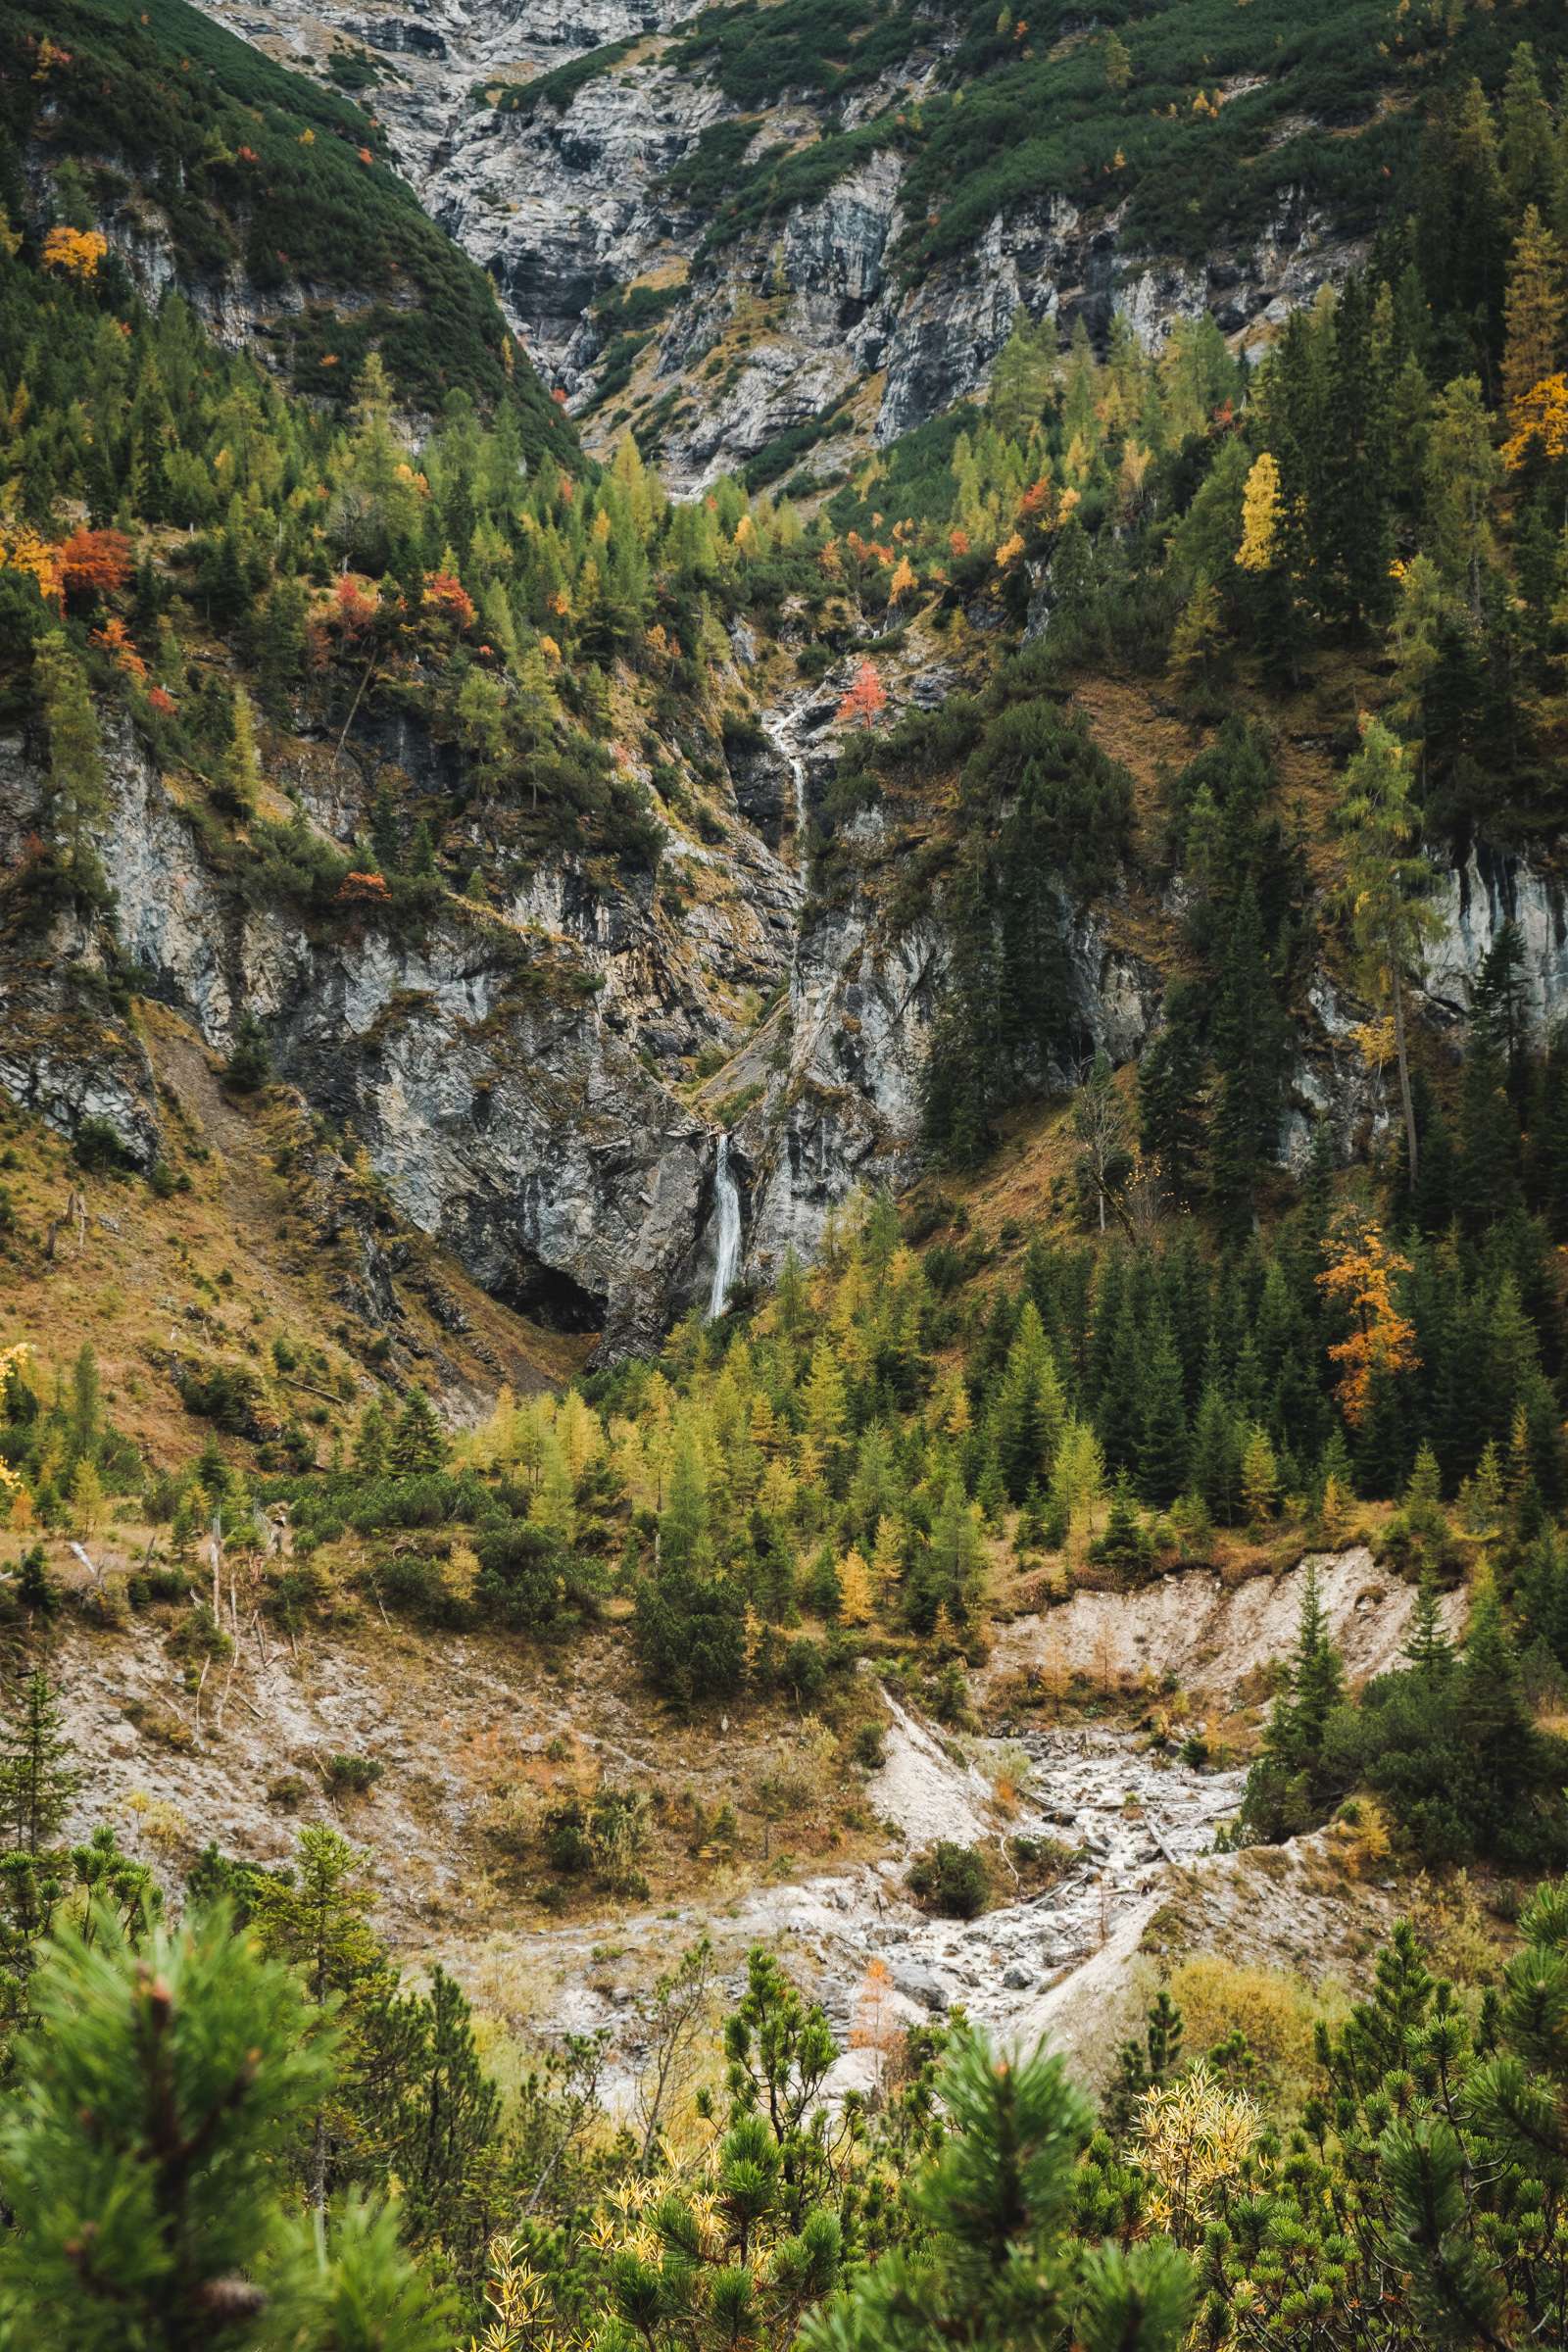 A magical waterfall scene in the Karwendel flowing over multiple levels of dense autumn forest